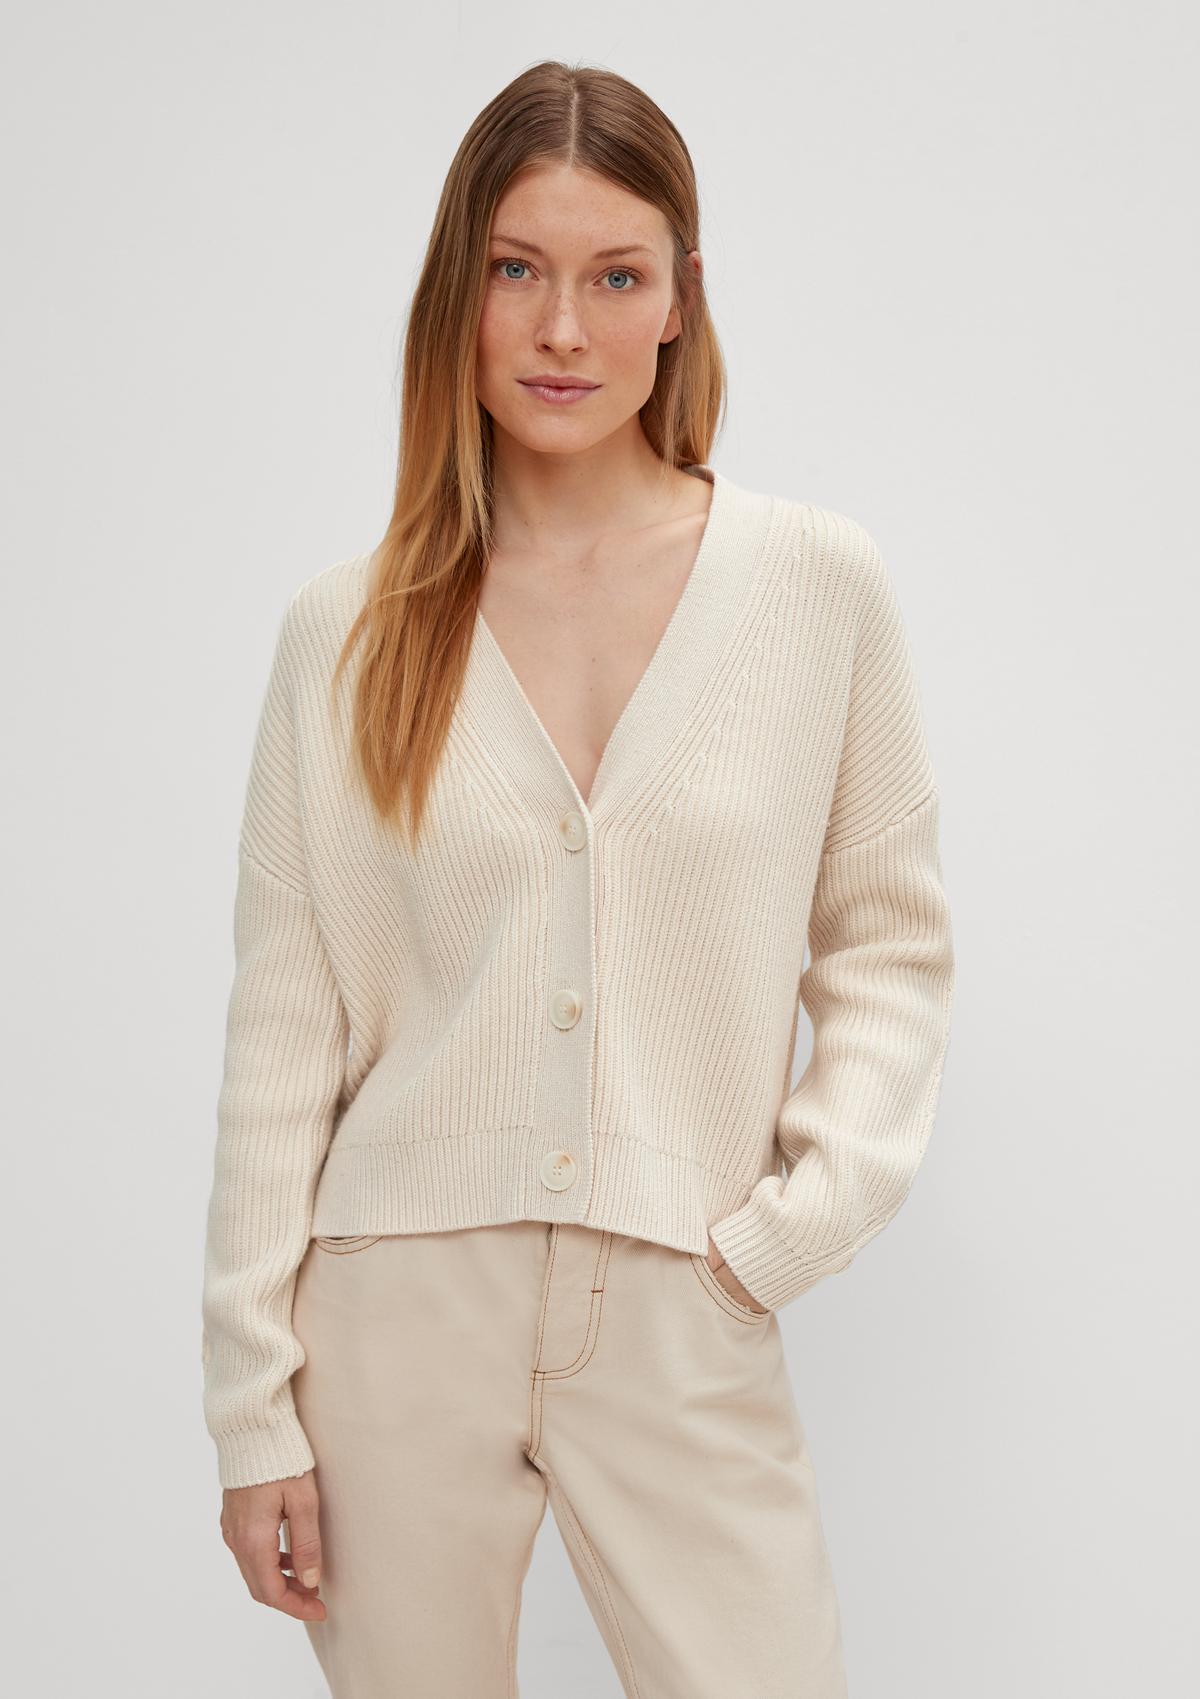 Cardigan with a cable knit pattern - light beige | Comma